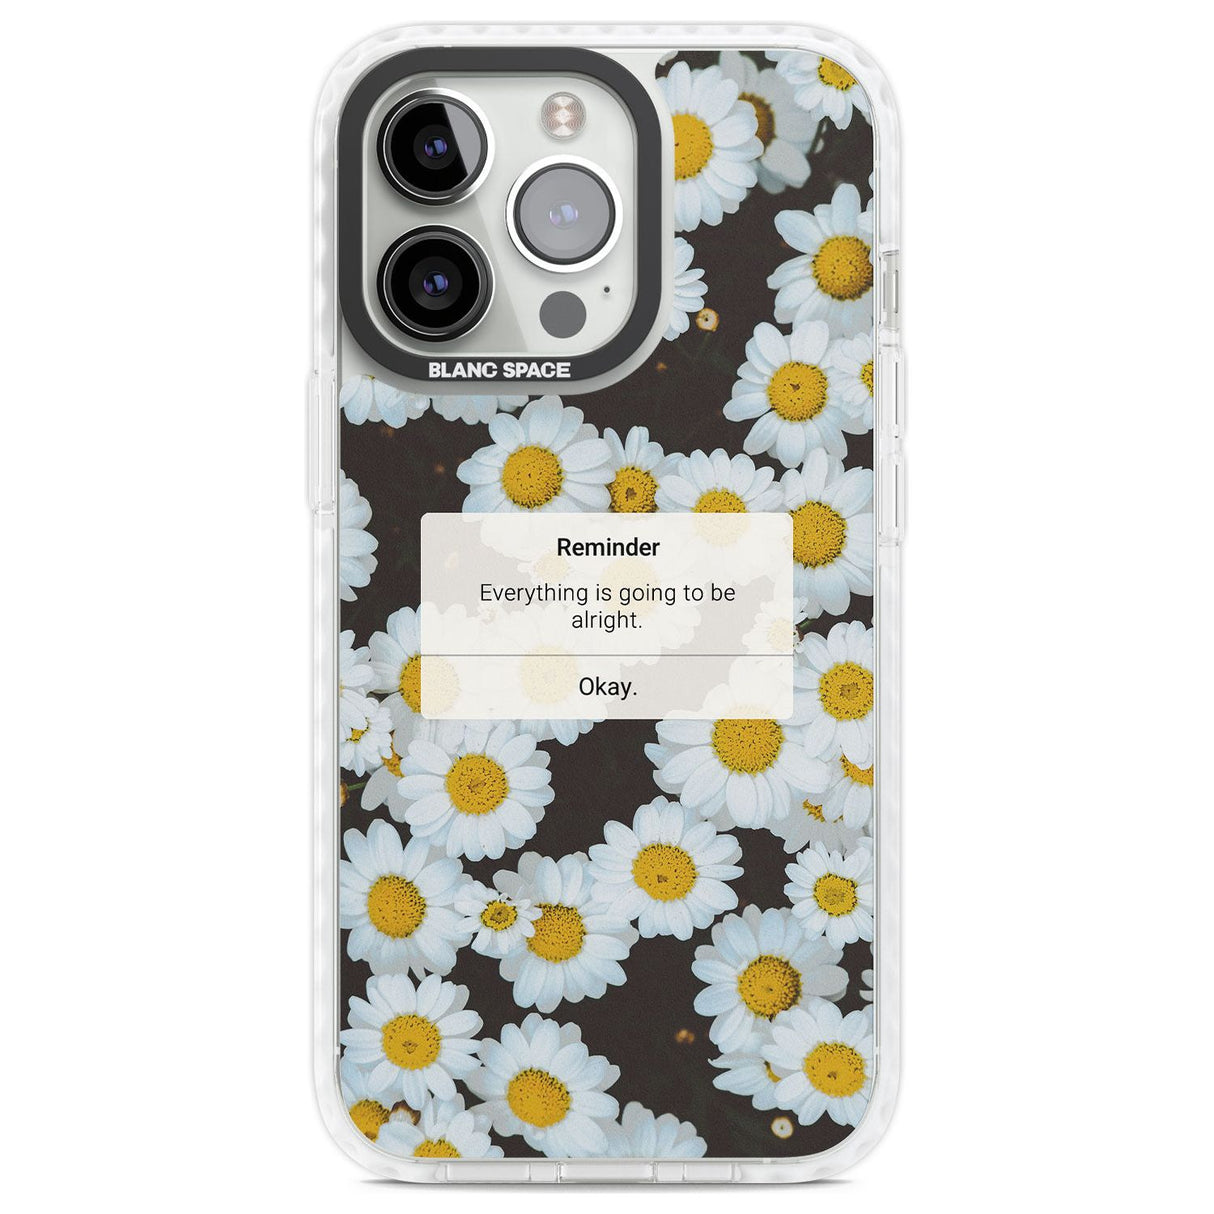 "Everything will be alright" iPhone Reminder Phone Case iPhone 13 Pro / Impact Case,iPhone 14 Pro / Impact Case,iPhone 15 Pro Max / Impact Case,iPhone 15 Pro / Impact Case Blanc Space